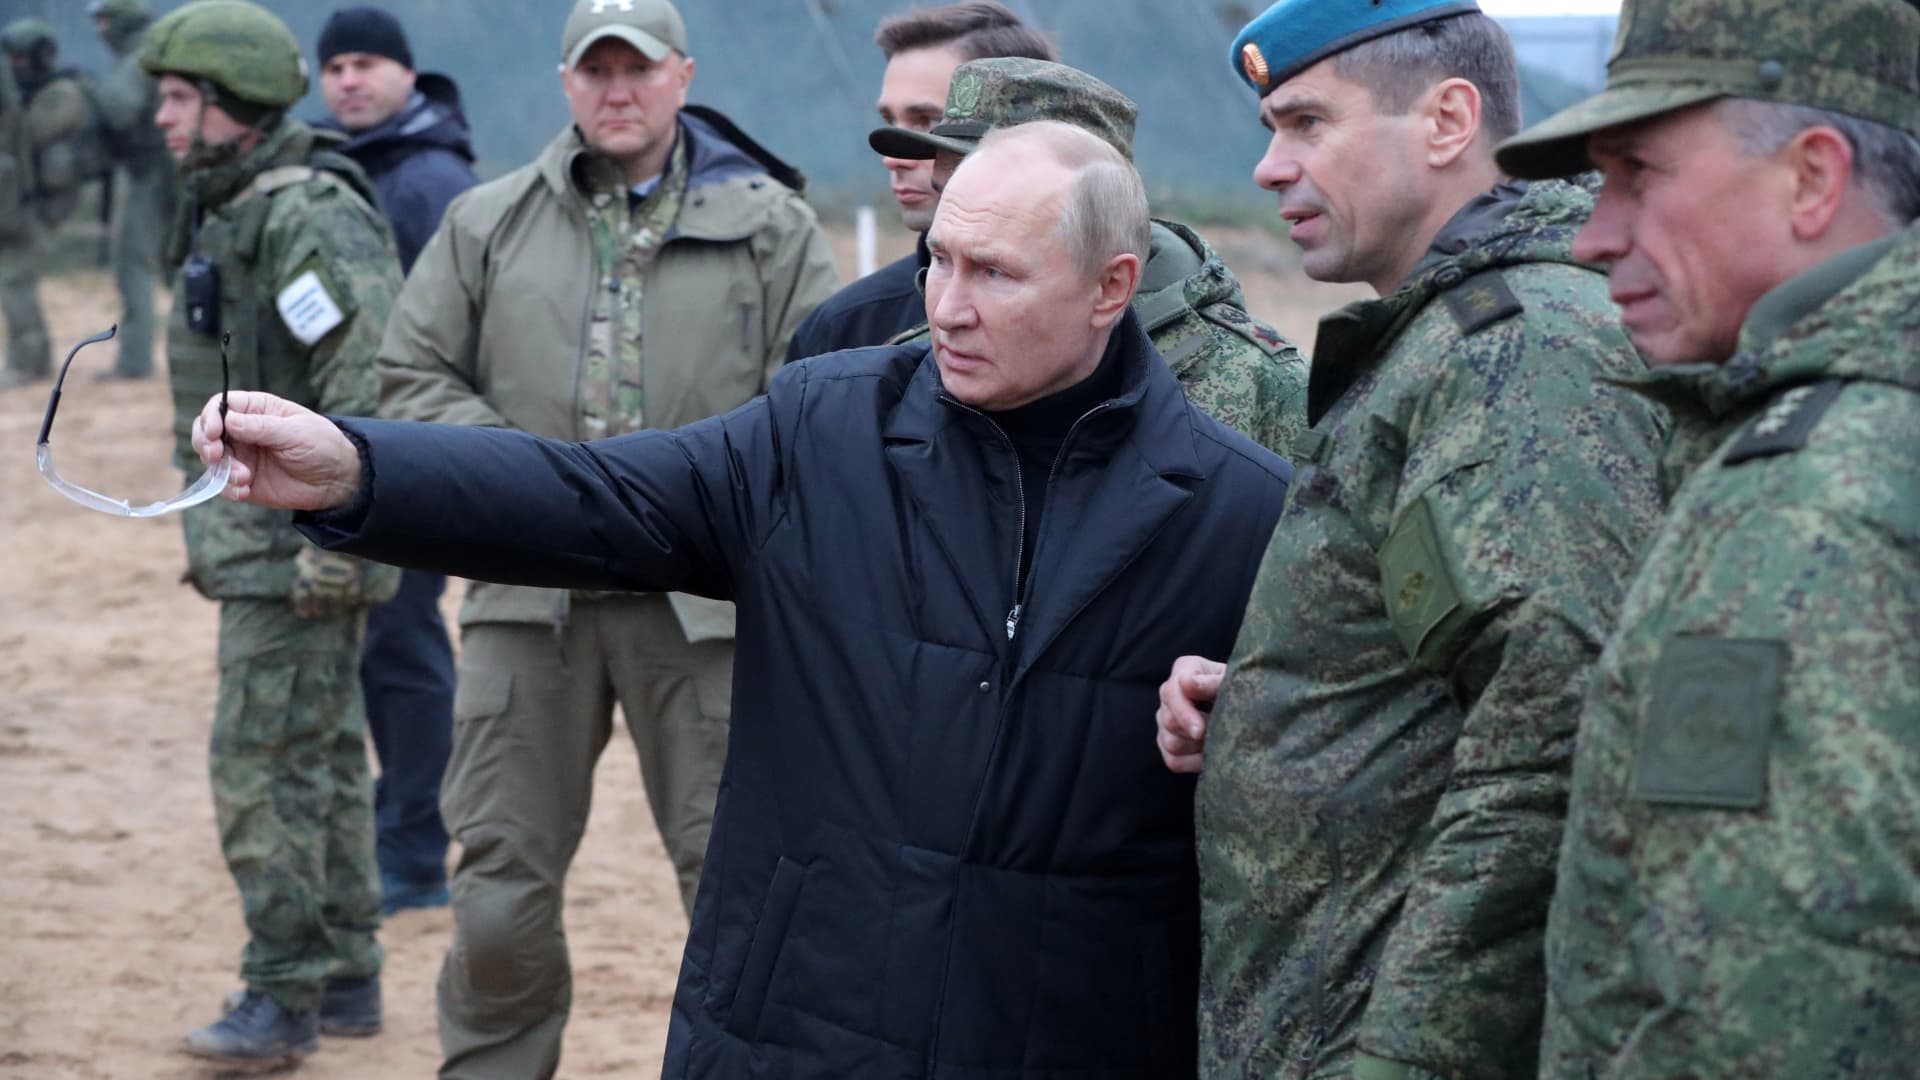 Russian President Vladimir Putin (C) meets soldiers during a visit at a military training centre of the Western Military District for mobilised reservists, outside the town of Ryazan on October 20, 2022. (Photo by Mikhail Klimentyev / Sputnik / AFP) (Photo by MIKHAIL KLIMENTYEV/Sputnik/AFP via Getty Images)